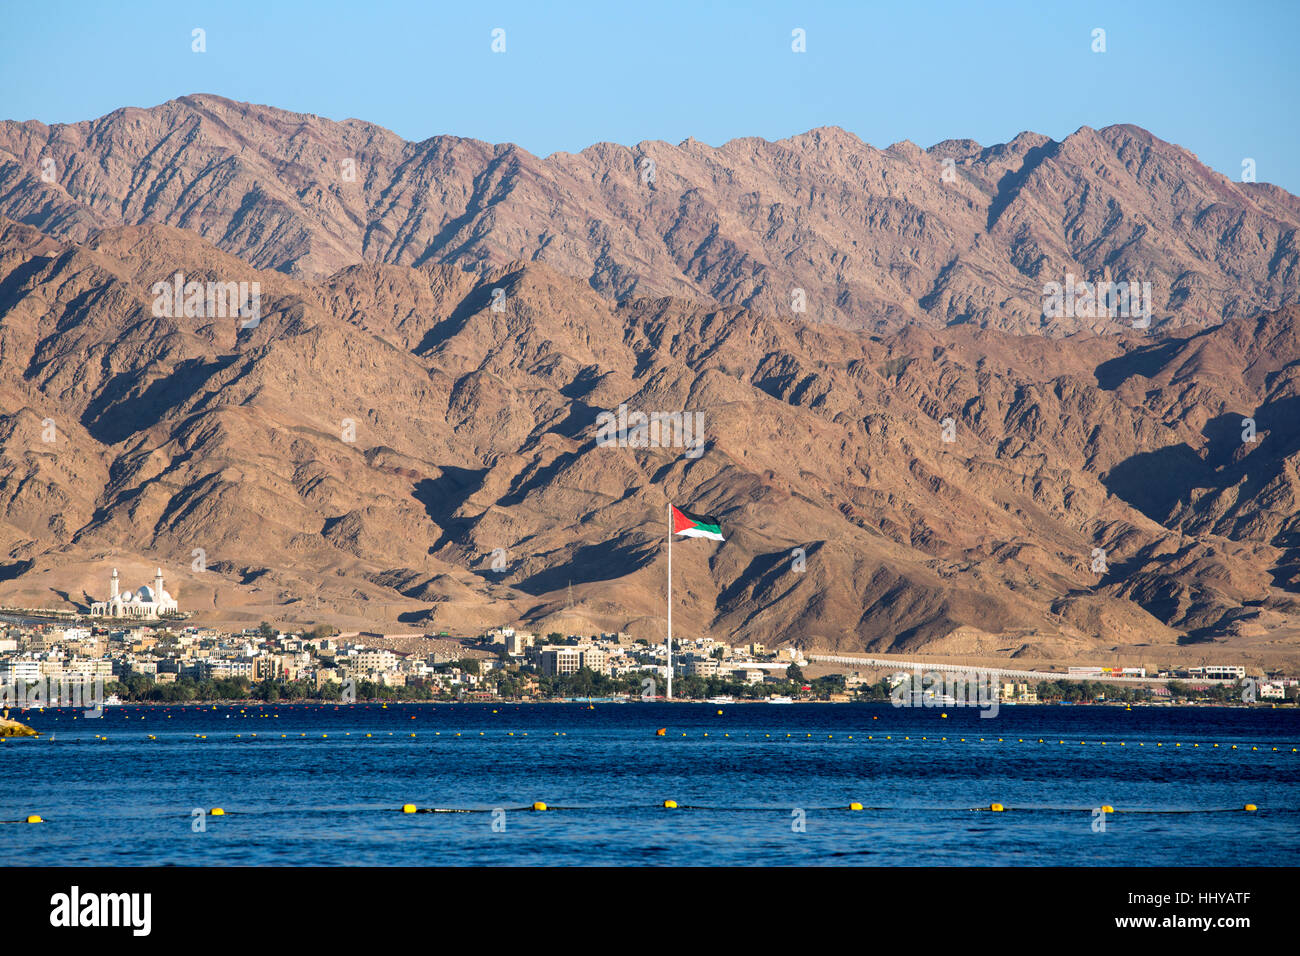 Gentage sig dedikation offset View to the red mountains of Jordan from Eilat, Israel Stock Photo - Alamy